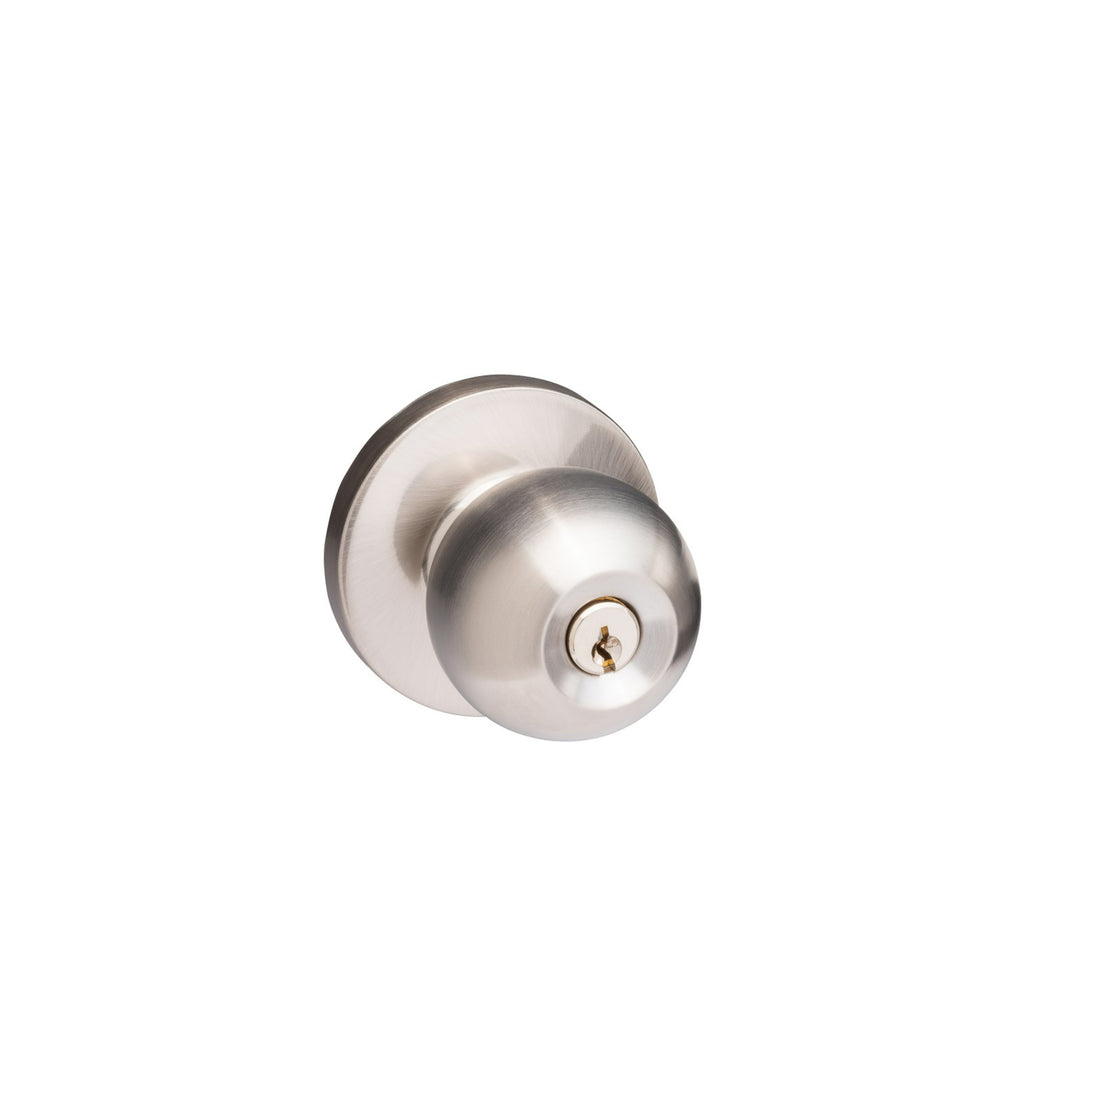 Stainless Steel Commercial Storeroom Ball Knob Trim with Lock for Panic Exit Device -  Pro-Edge HD